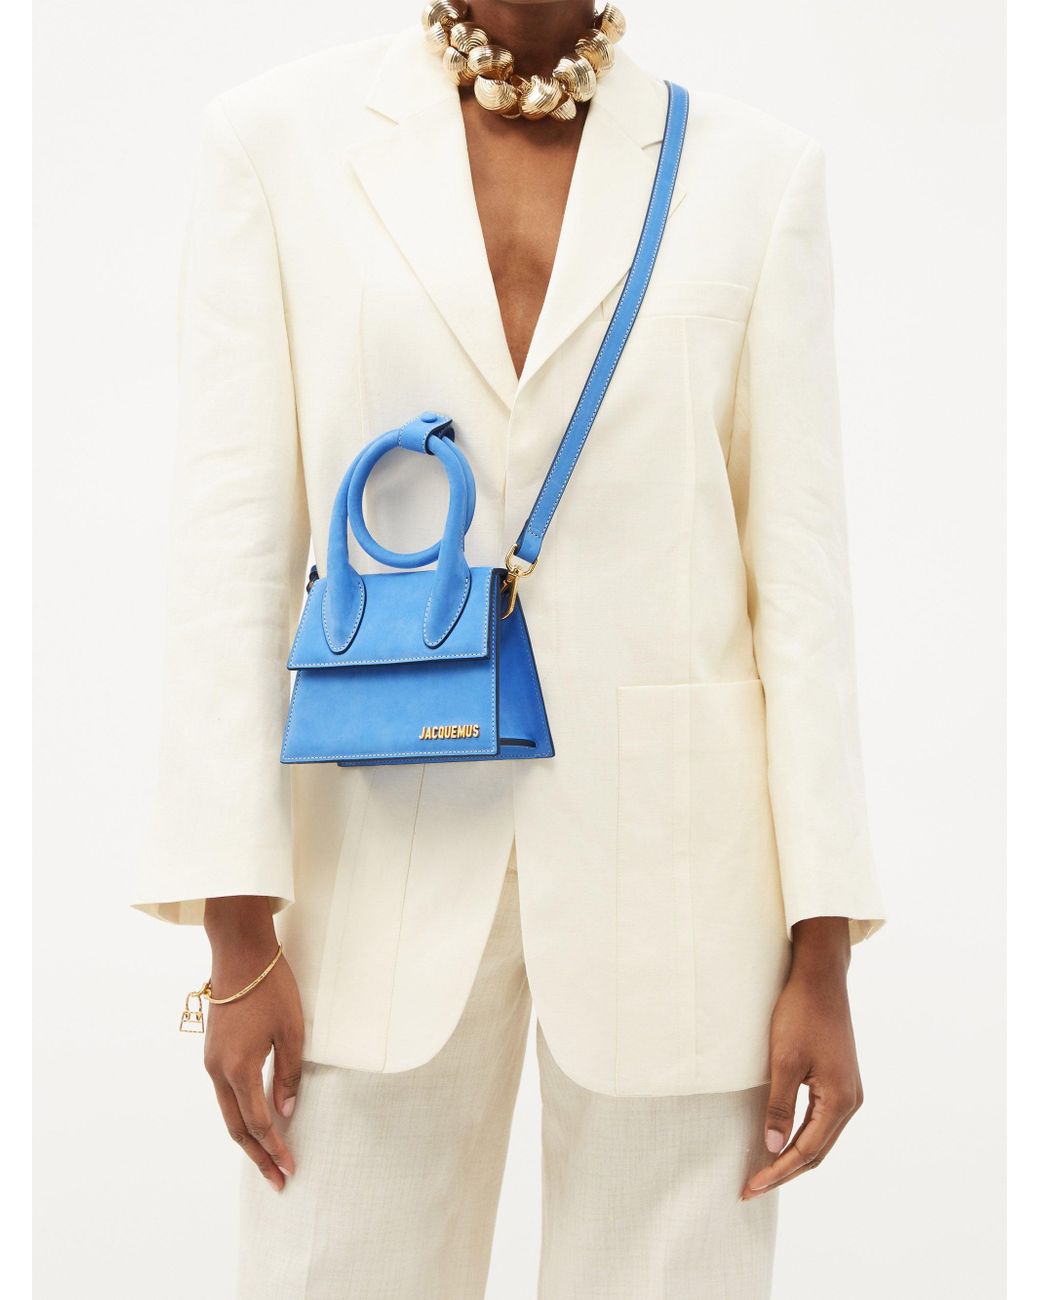 Jacquemus Chiquito Noeud Leather Cross-body Bag in Blue | Lyst